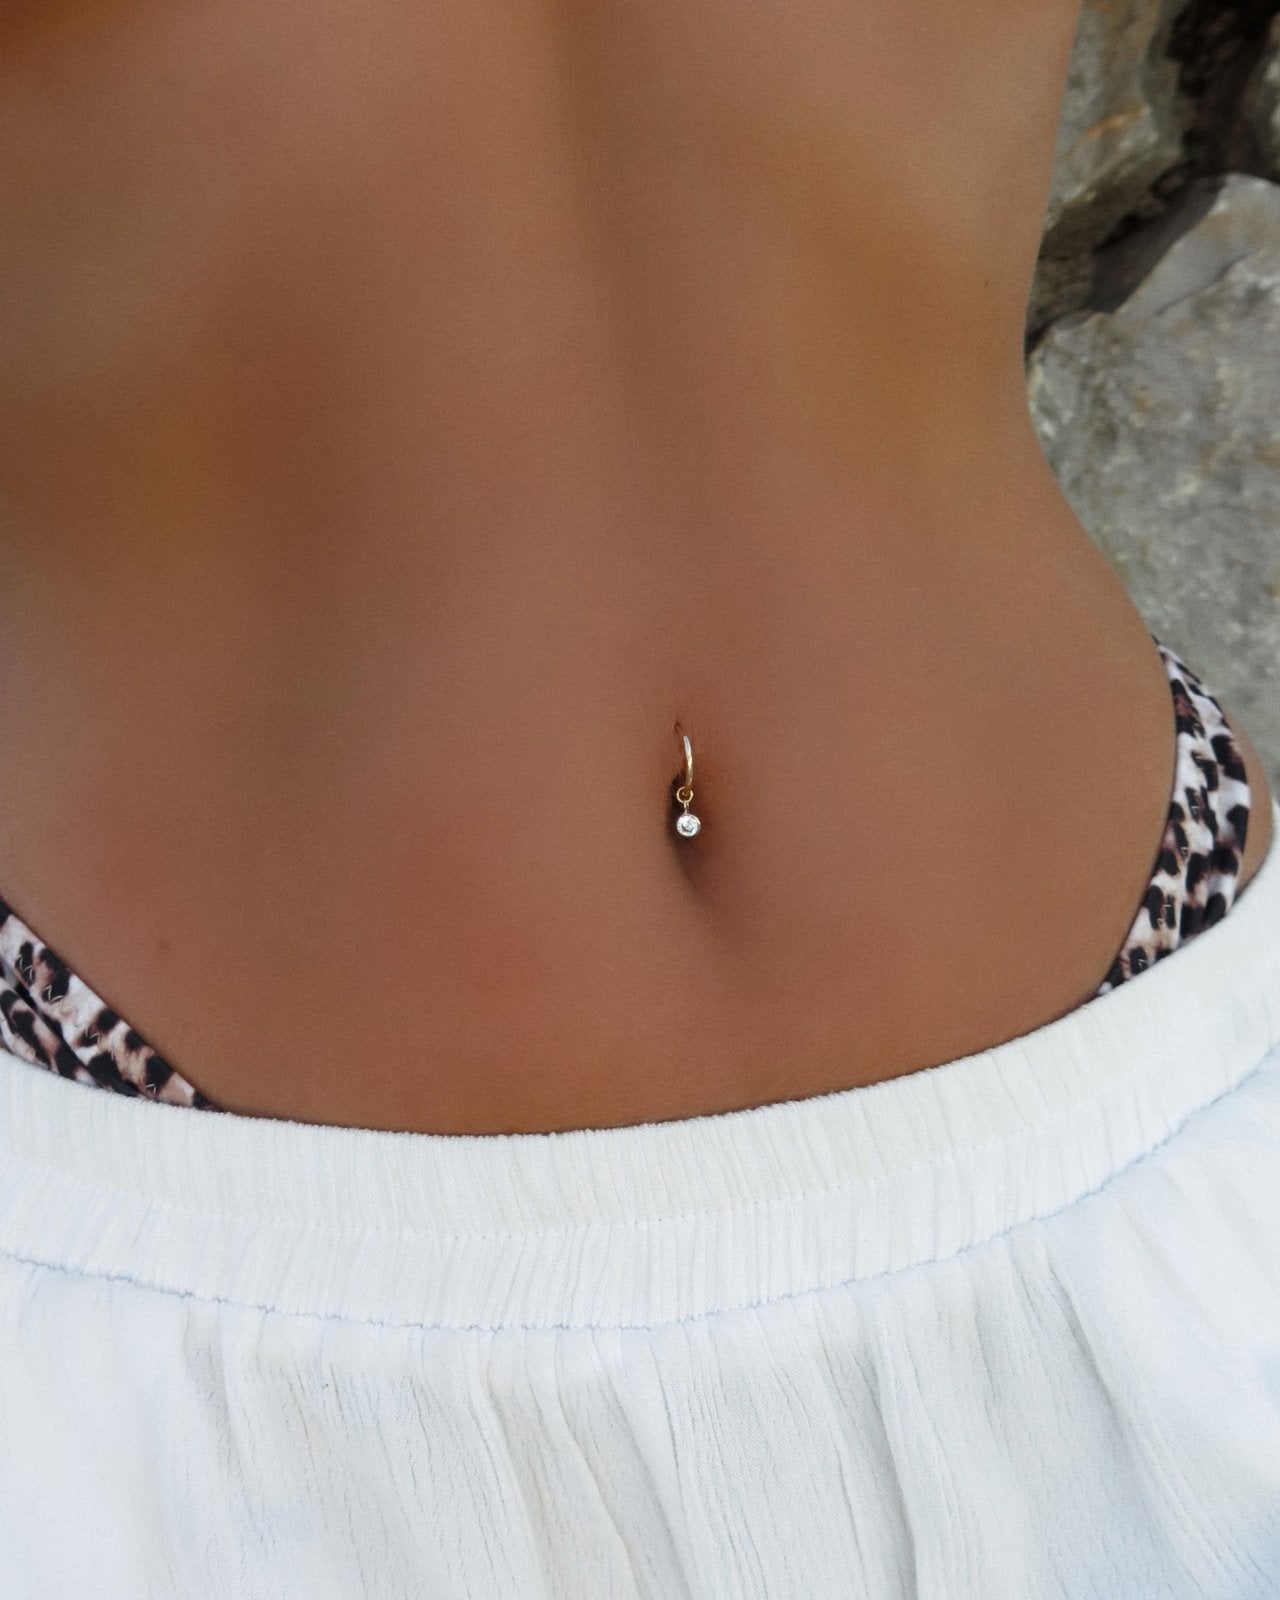 The Tiffany Gold Belly Button Ring | Wicked Alternative Body Fashion